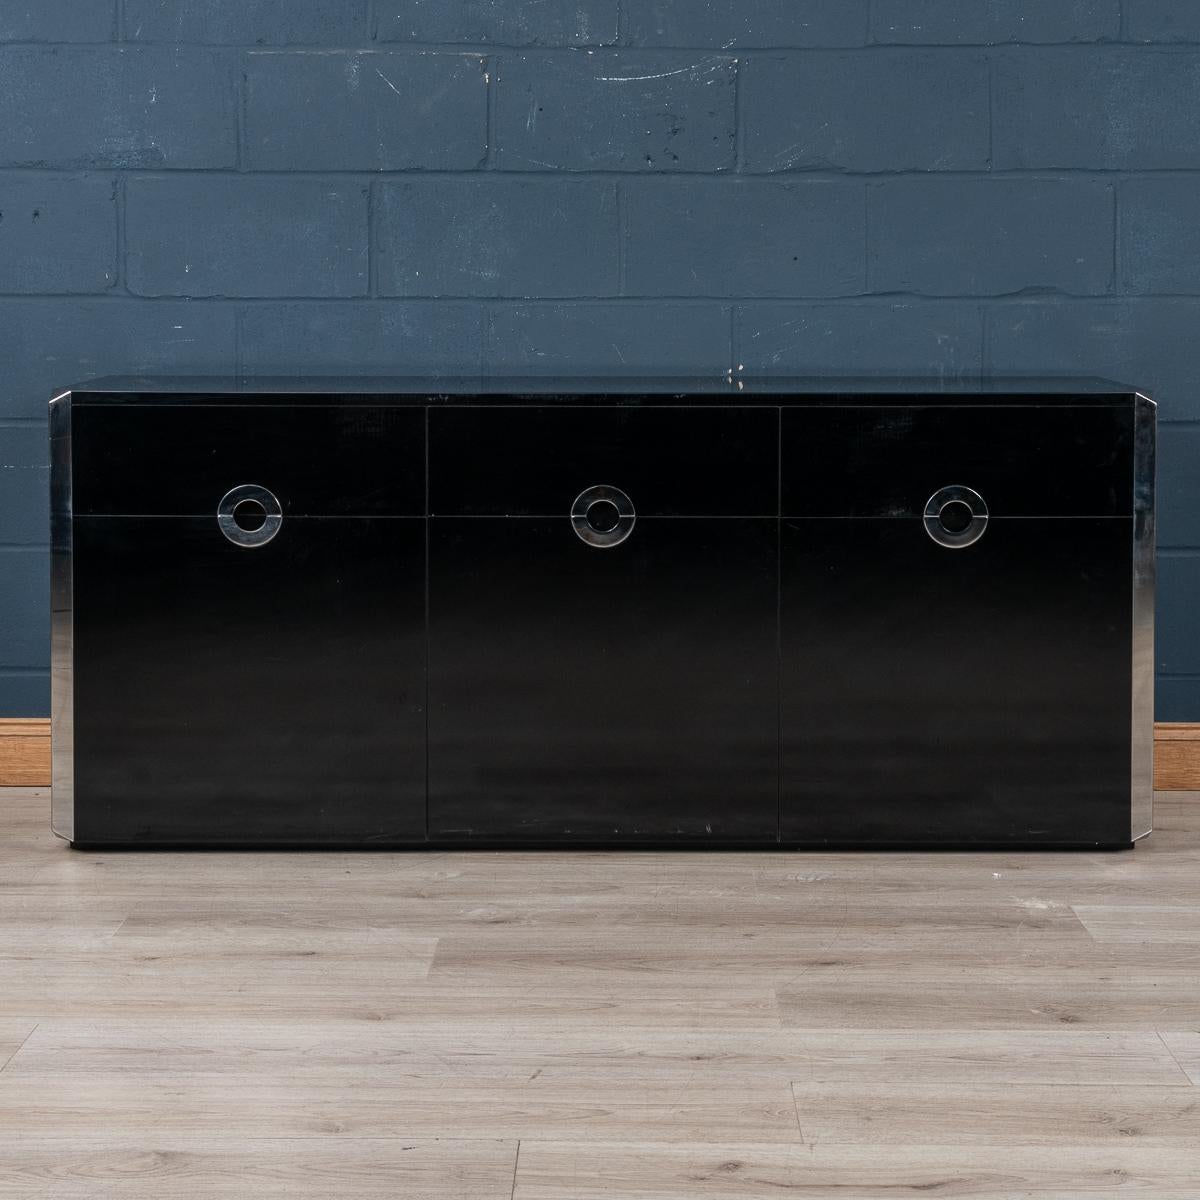 Italian 20th Century Three-Door Sideboard By Willy Rizzo For Mario Sabot, Italy, 1970s